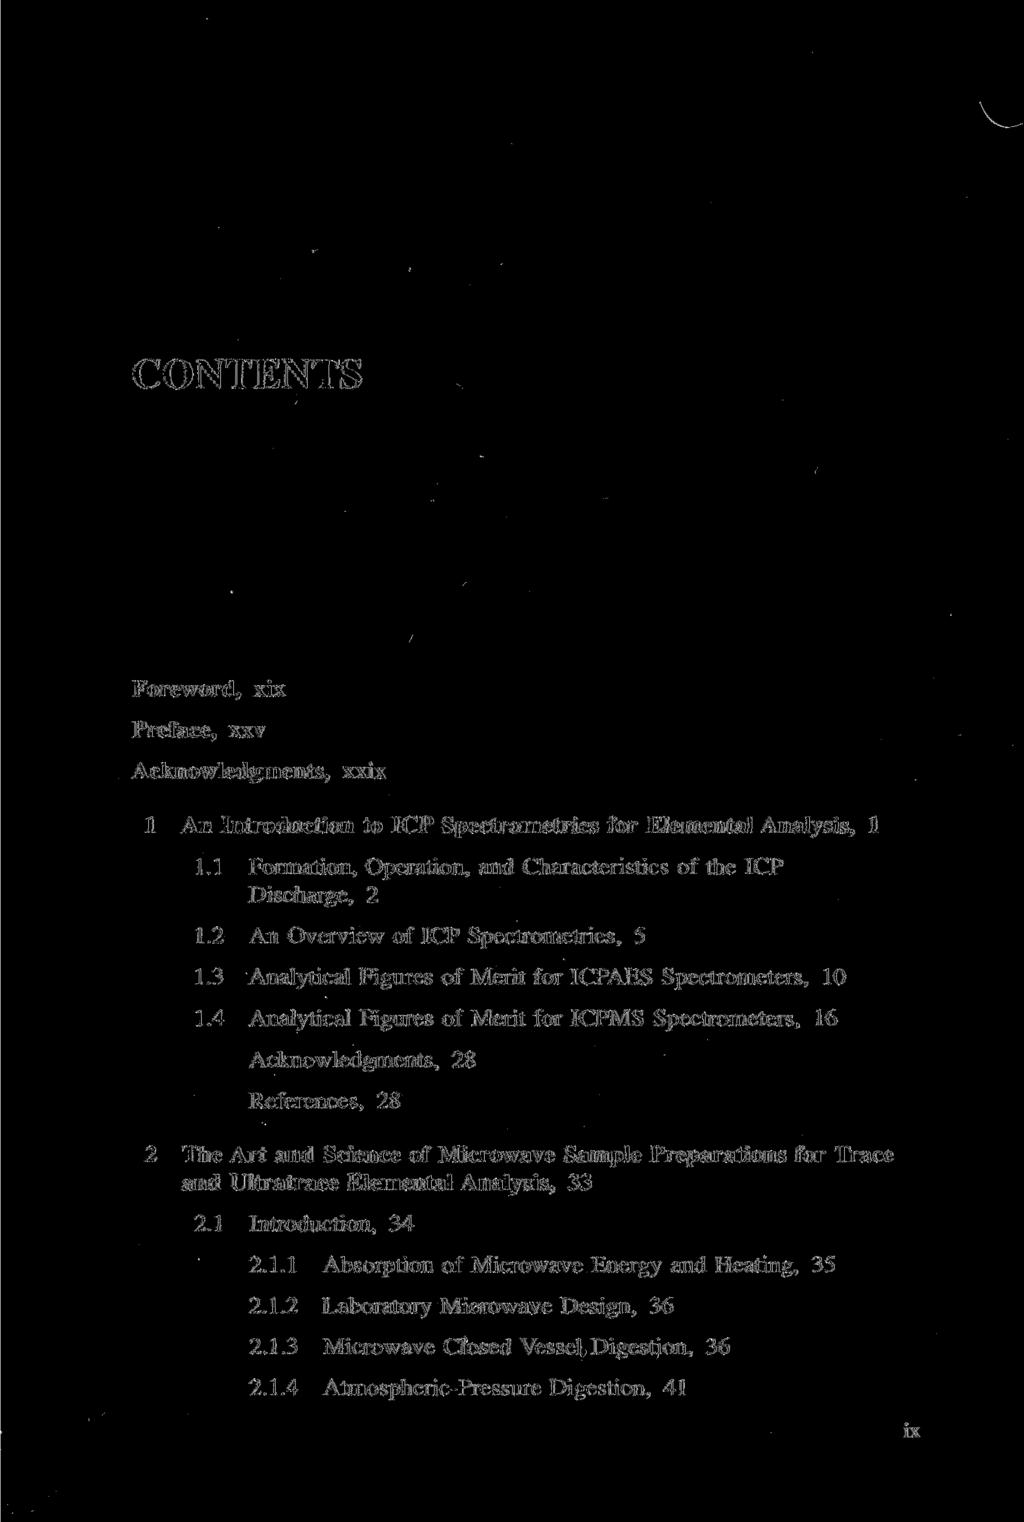 CONTENTS Foreword, xix Preface, xxv Acknowledgments, xxix 1 An Introduction to ICP Spectrometries for Elemental Analysis, 1 1.1 Formation, Operation, and Characteristics of the ICP Discharge, 2 1.